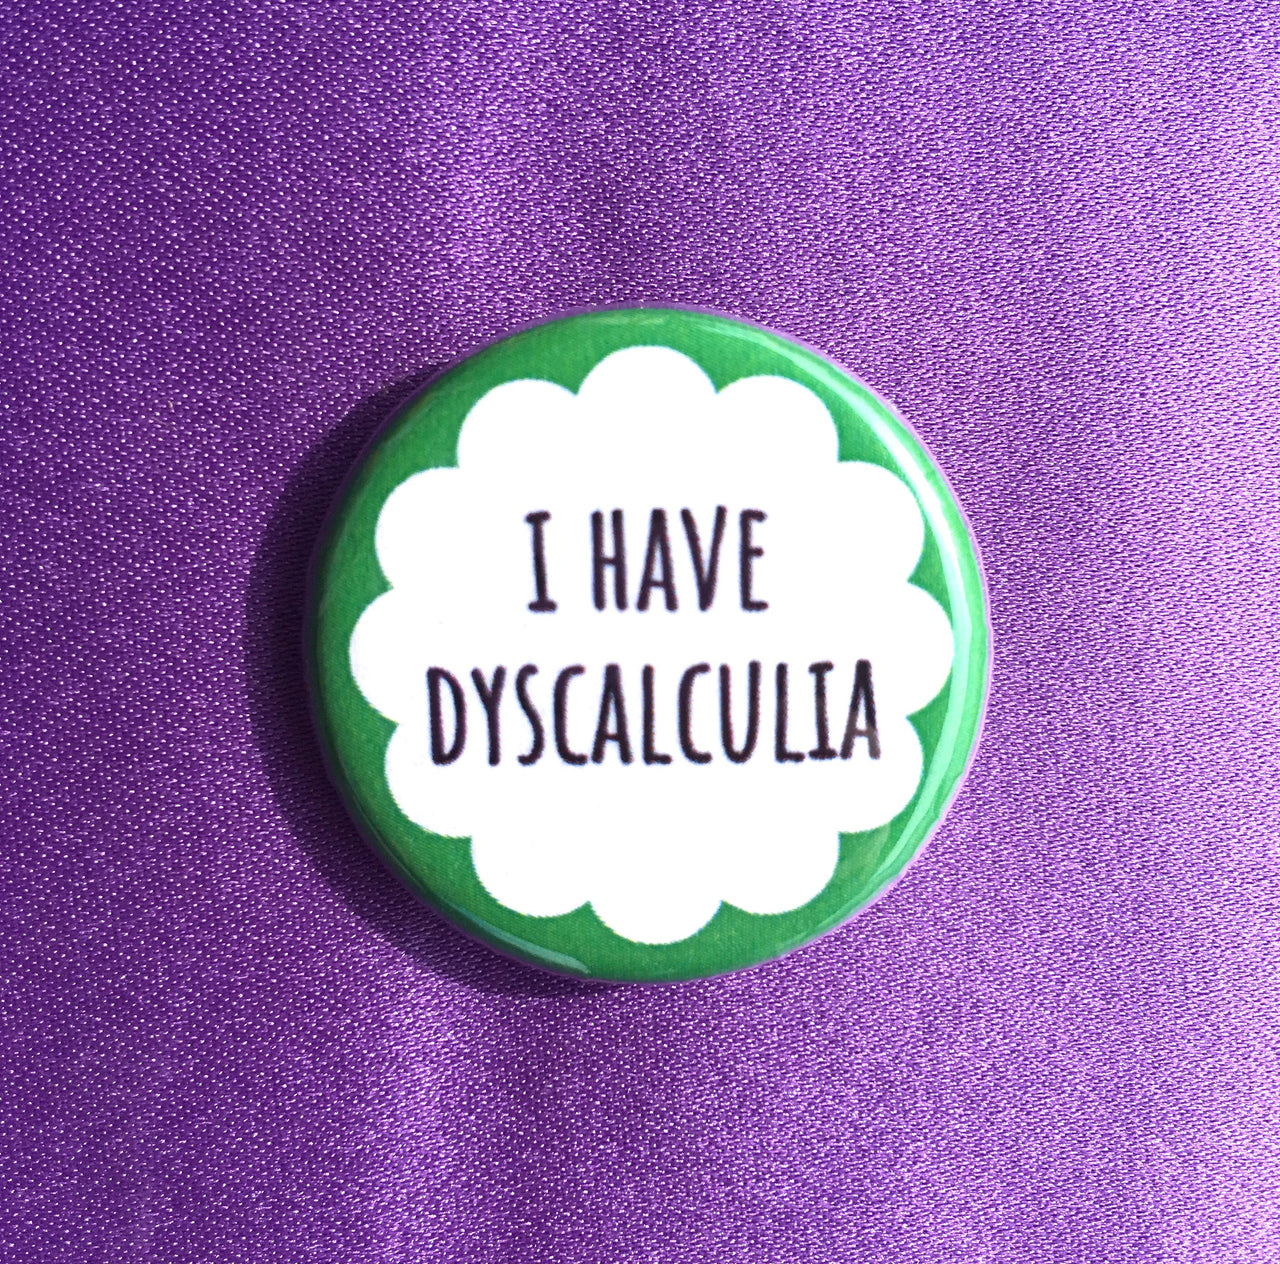 I have dyscalculia - Radical Buttons